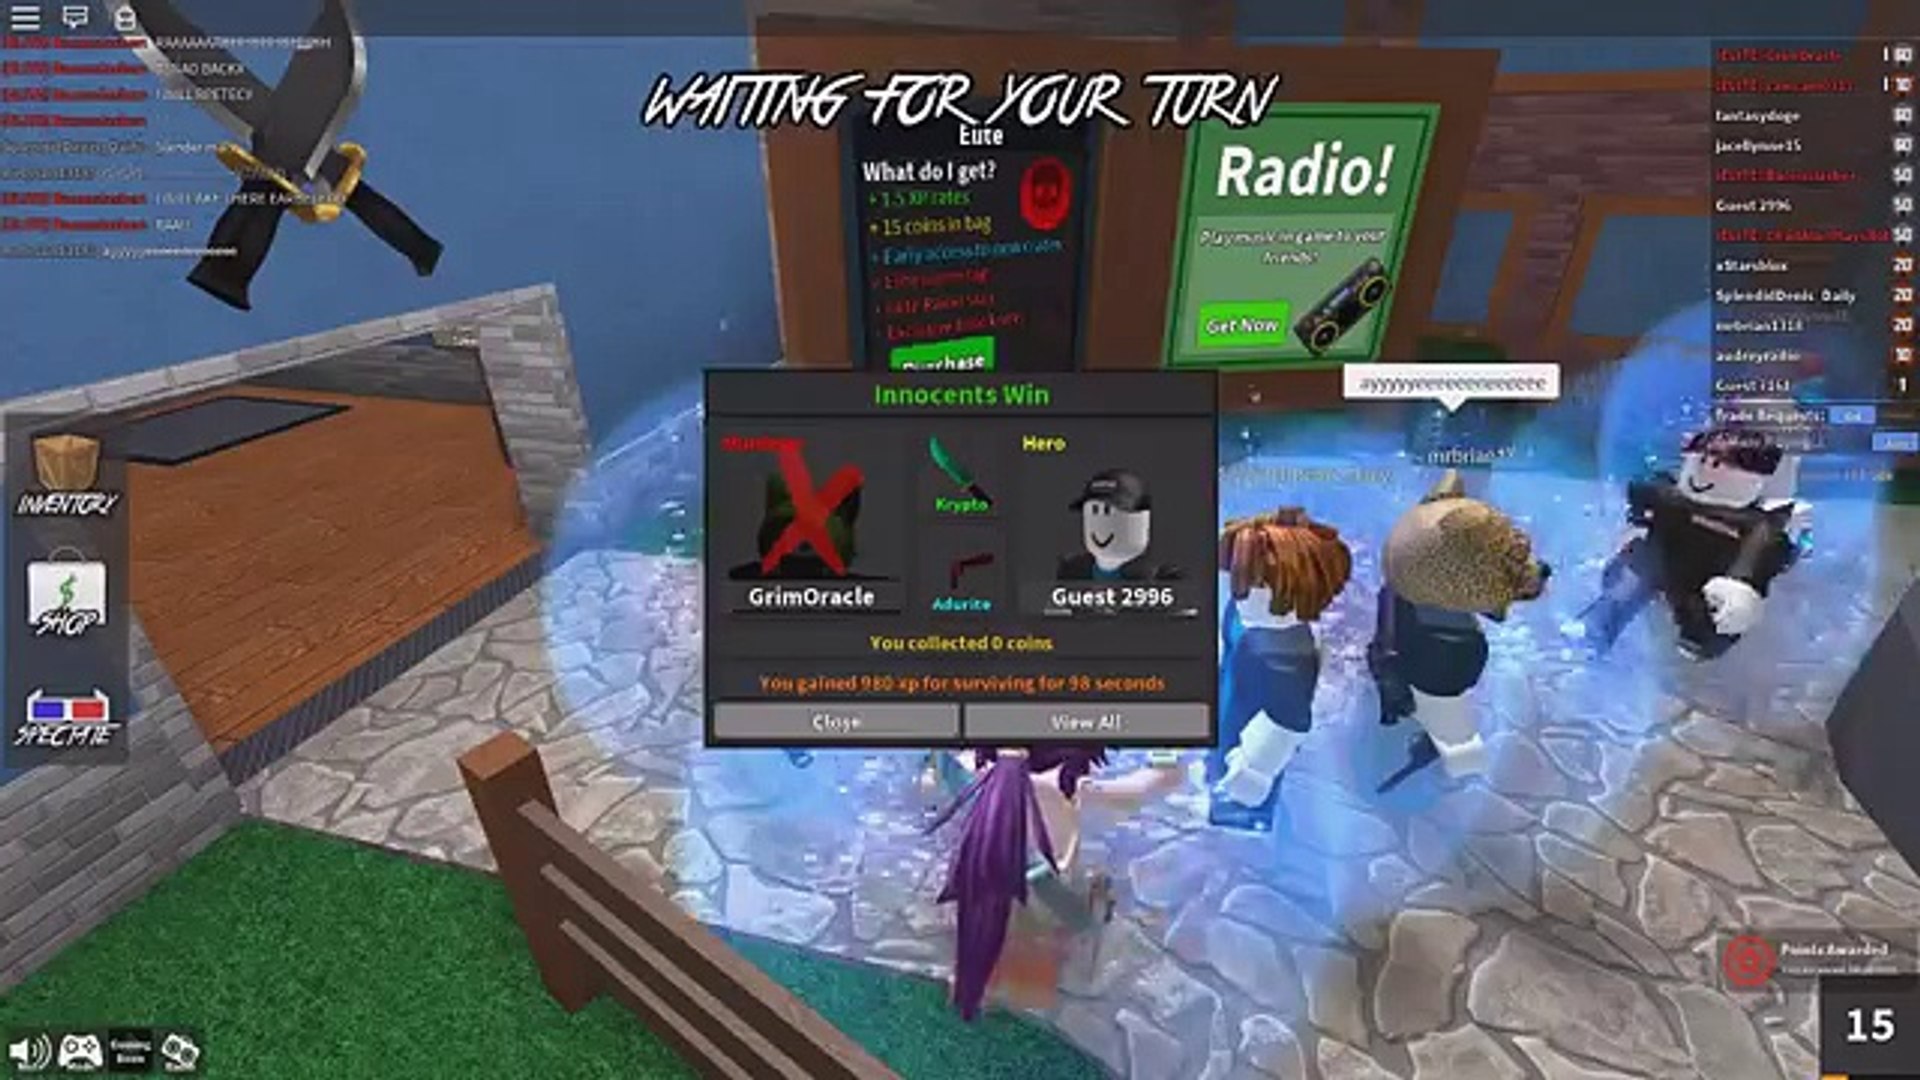 Roblox Lets Play Murder Mystery 2 Radiojh Games Gamer Chad Slg 2020 - roblox codes for murder mystery 2 2020